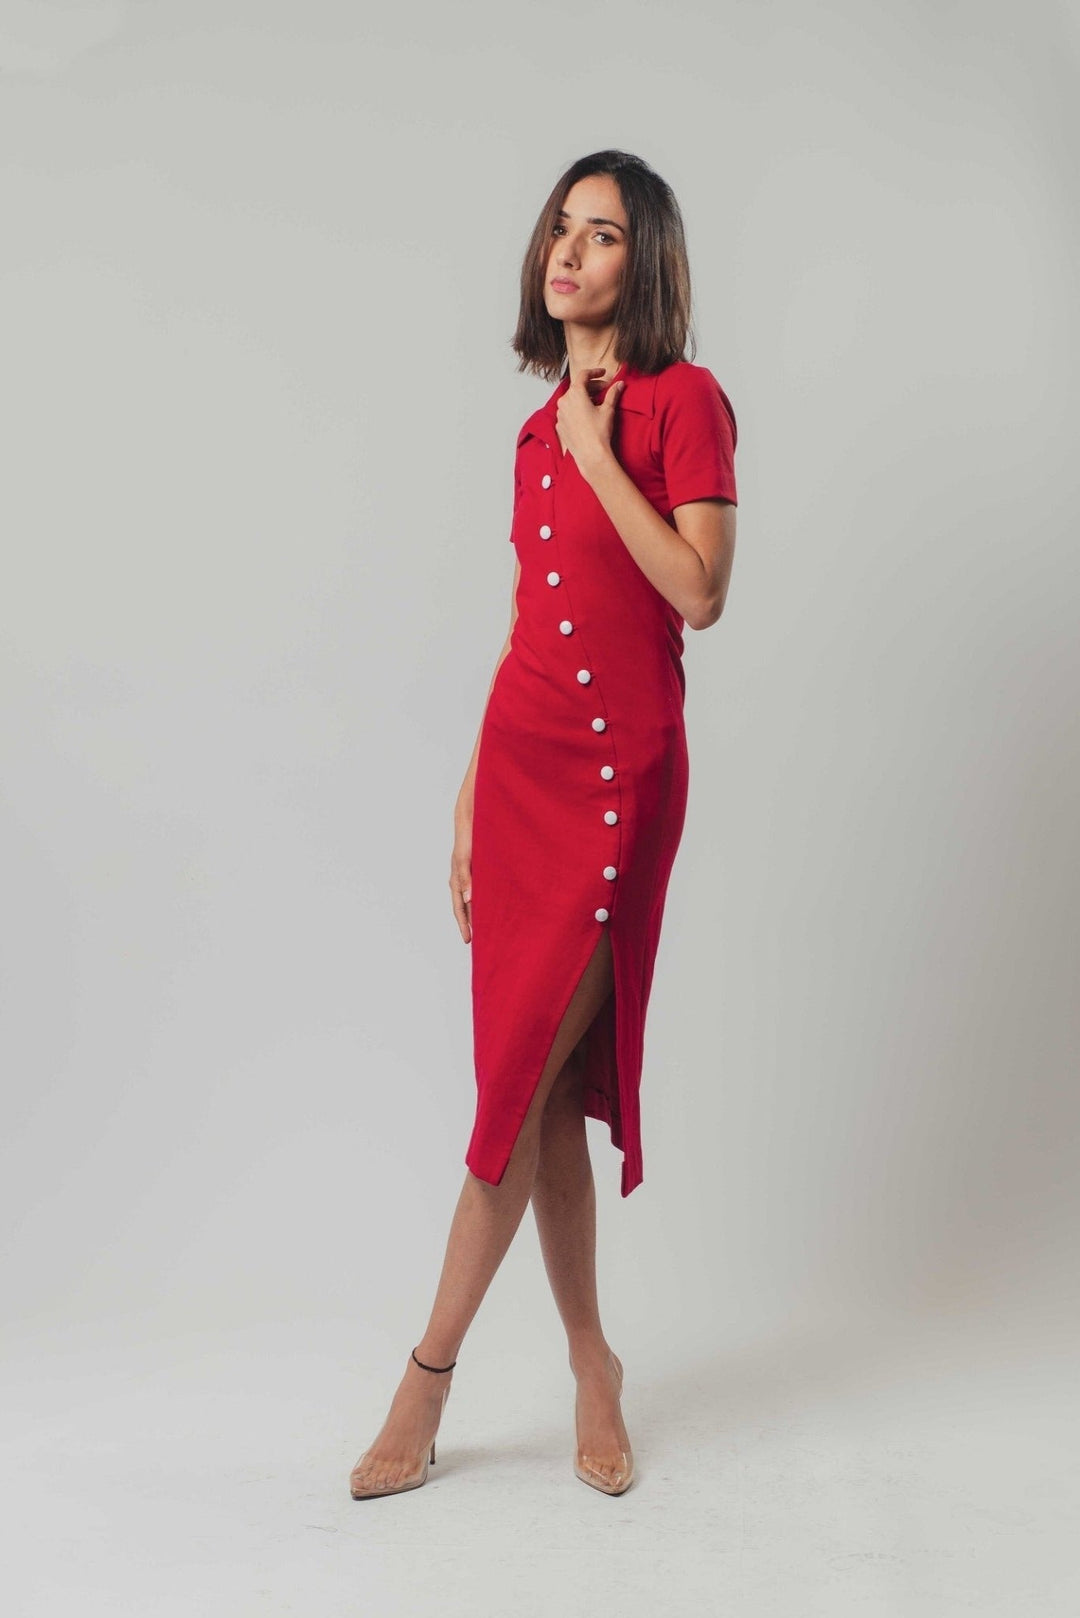 Chic red bodycon dress with side slit